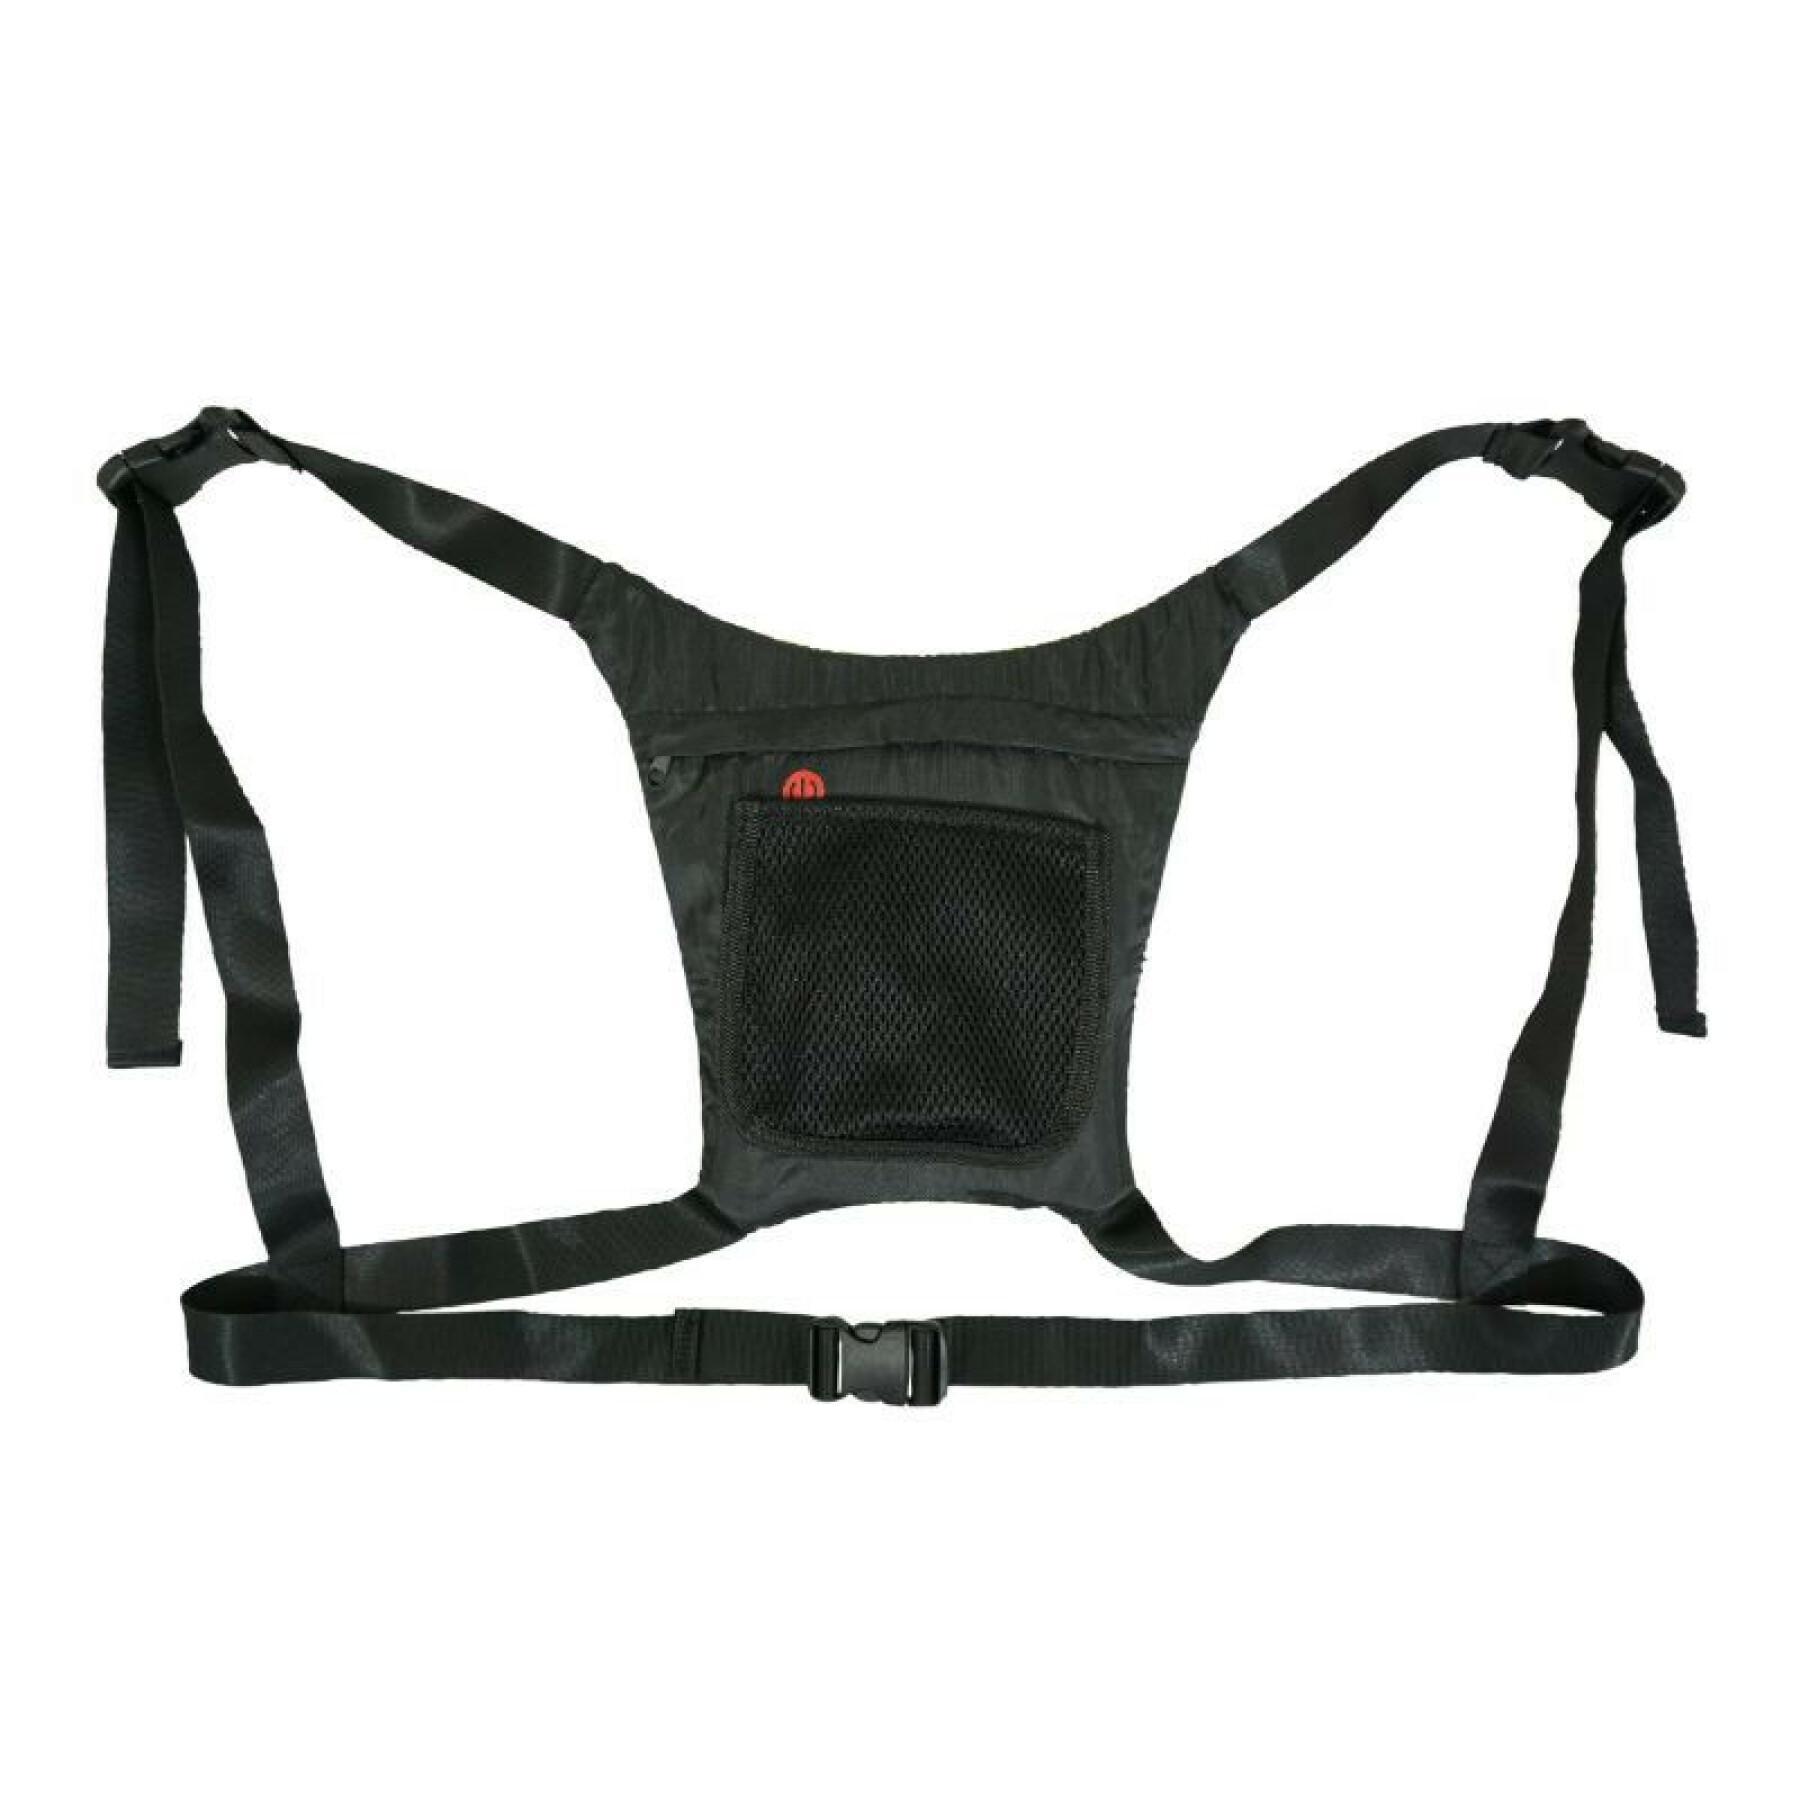 body lighting-harness with integrated 48 led signaling - wireless handlebar remote control usb rechargeable direction indicator (on vest) bike - scooter P2R